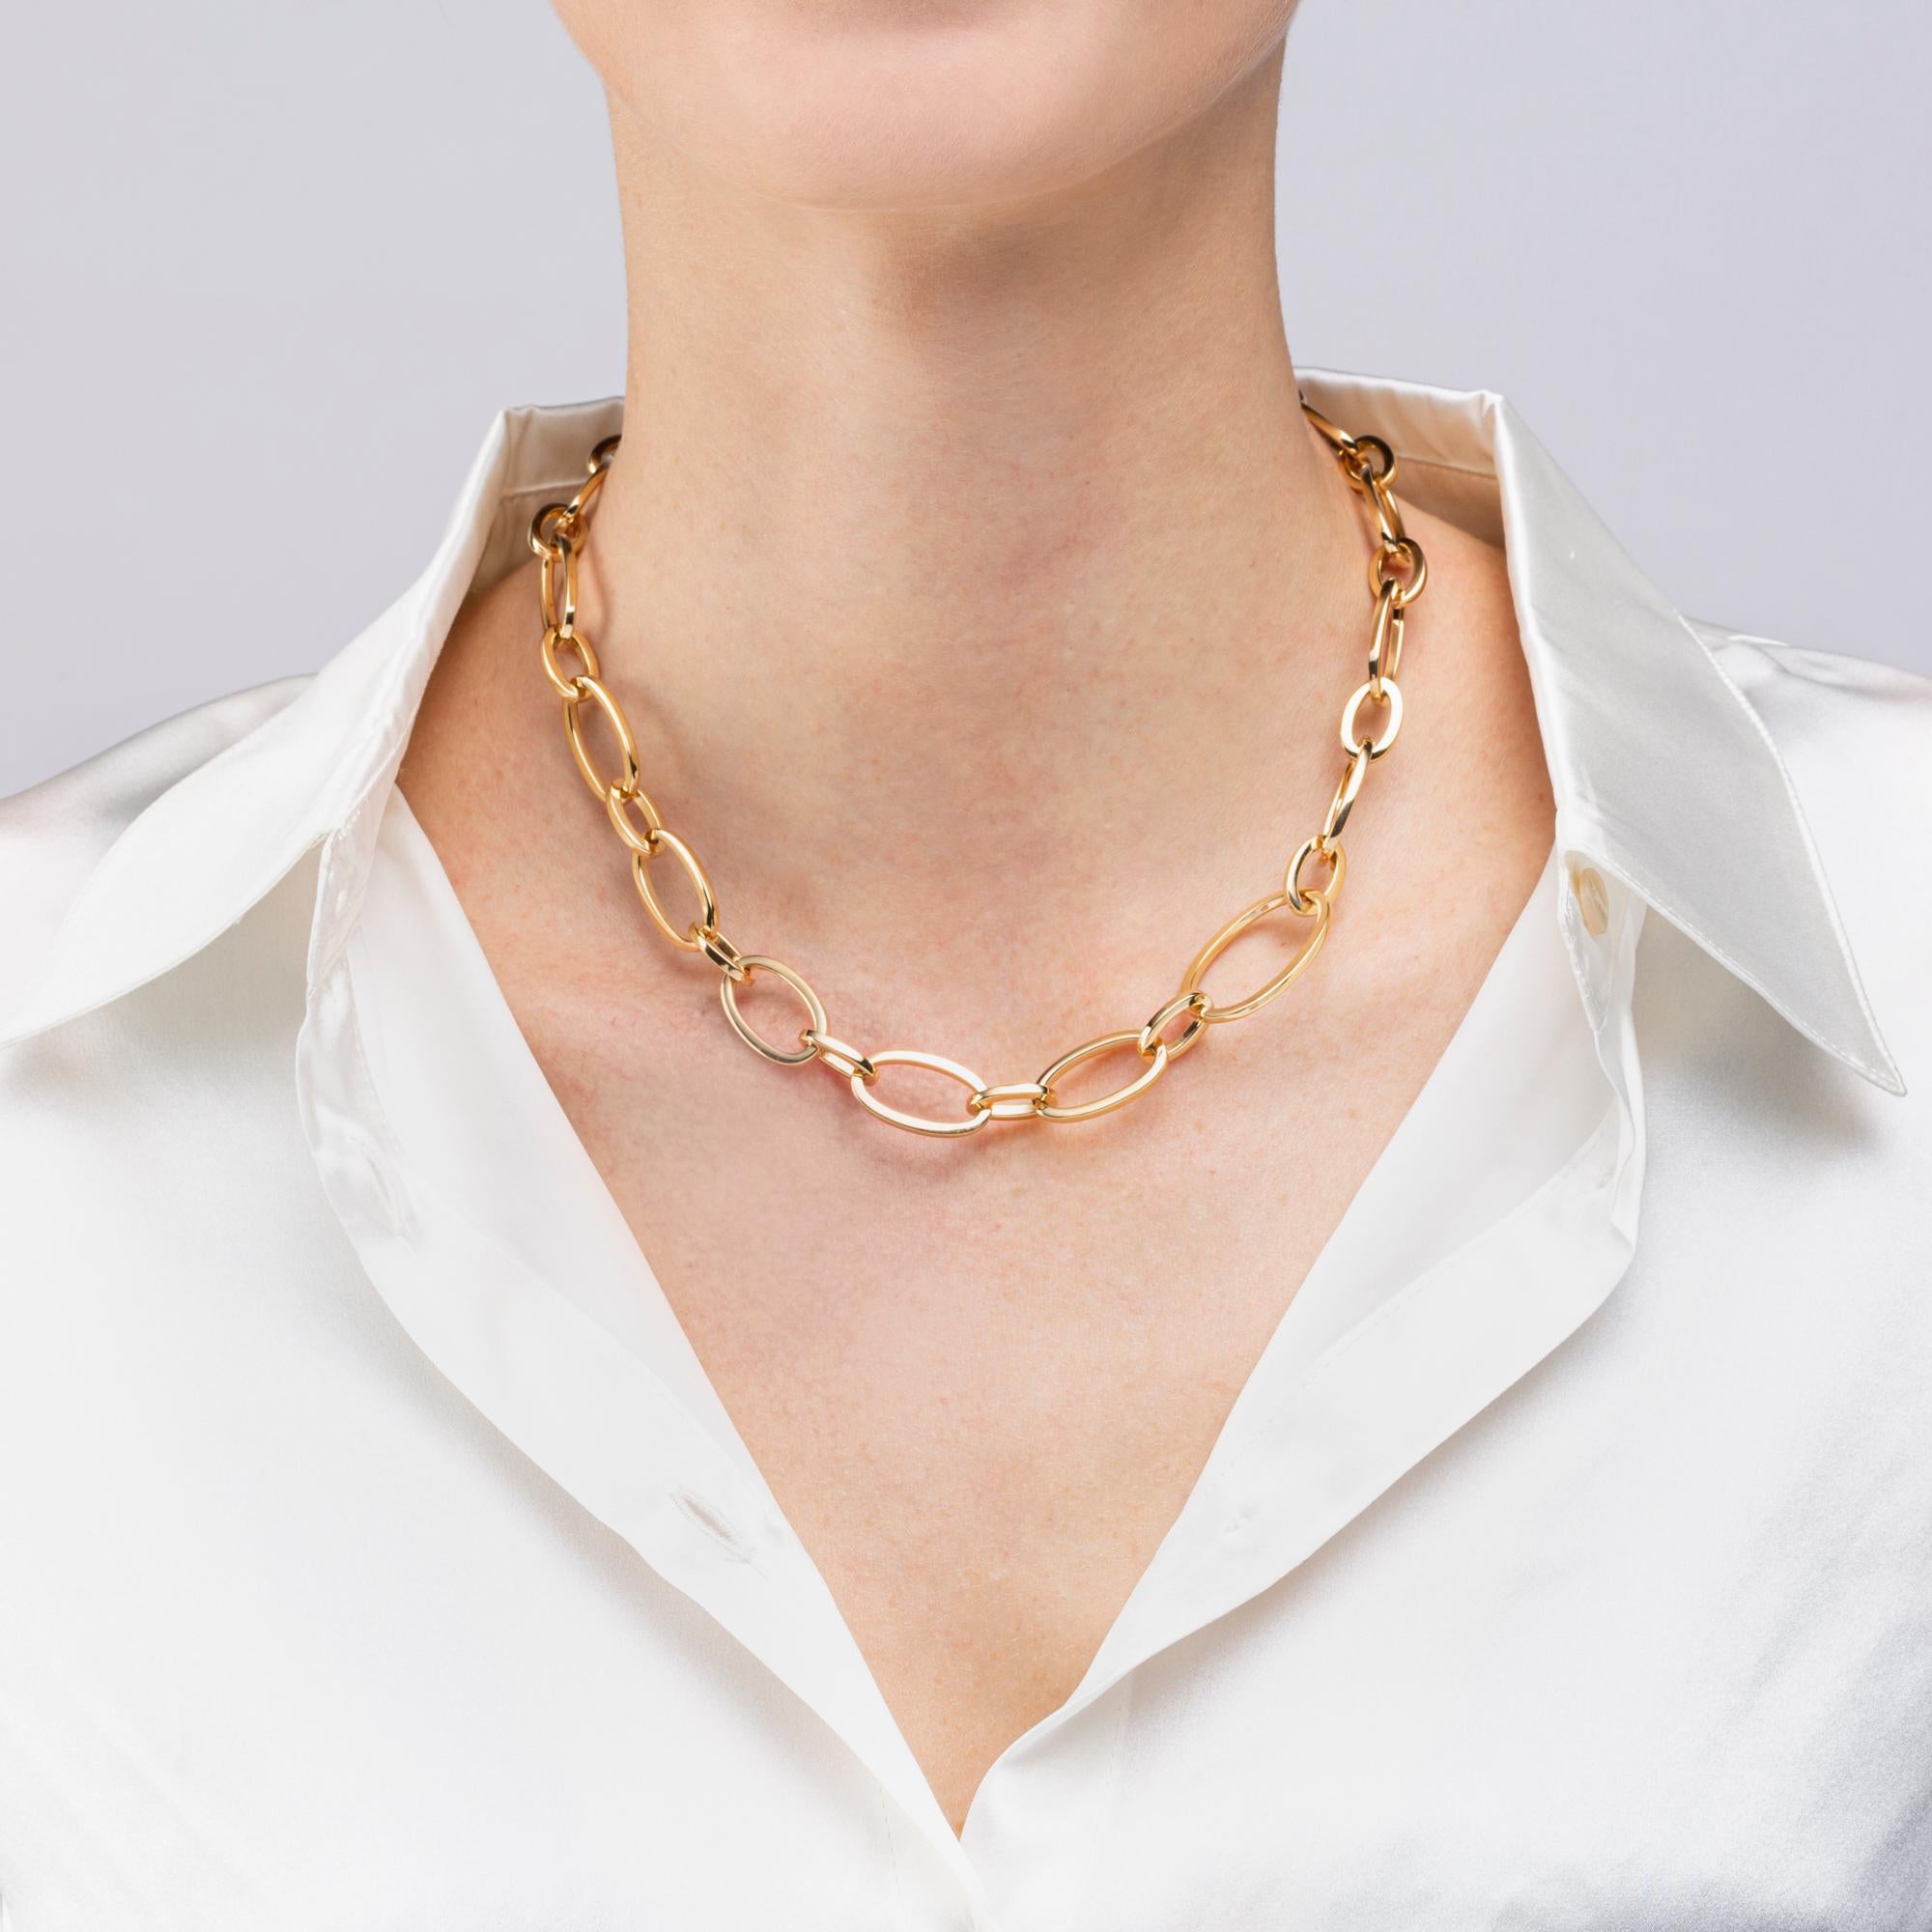 Alex Jona Design Collection, Hand crafted in Italy, 18 karat yellow gold 17.7 inch-44cm long link chain necklace.
Alex Jona jewels stand out, not only for their special design and for the excellent quality of the gemstones, but also for the careful